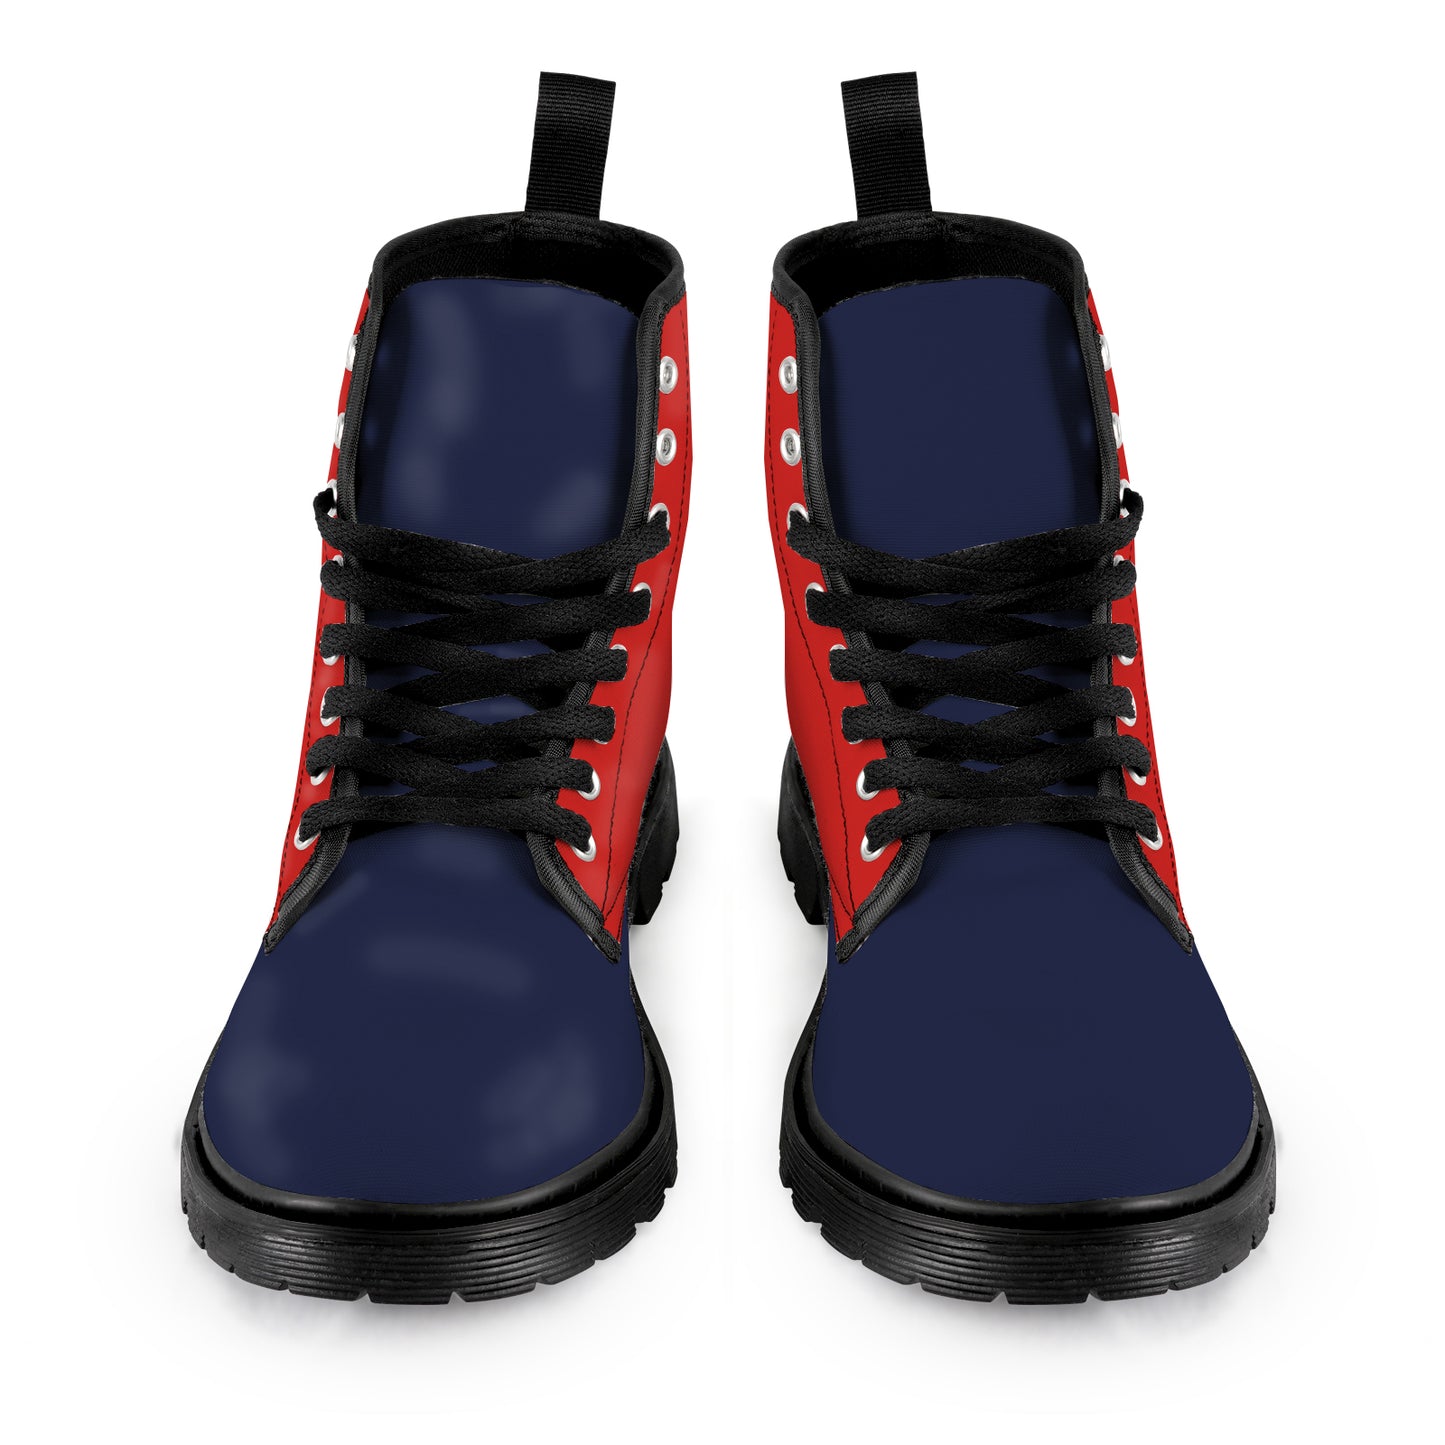 Men's Lace Up Canvas Boots - Red/Navy Combo